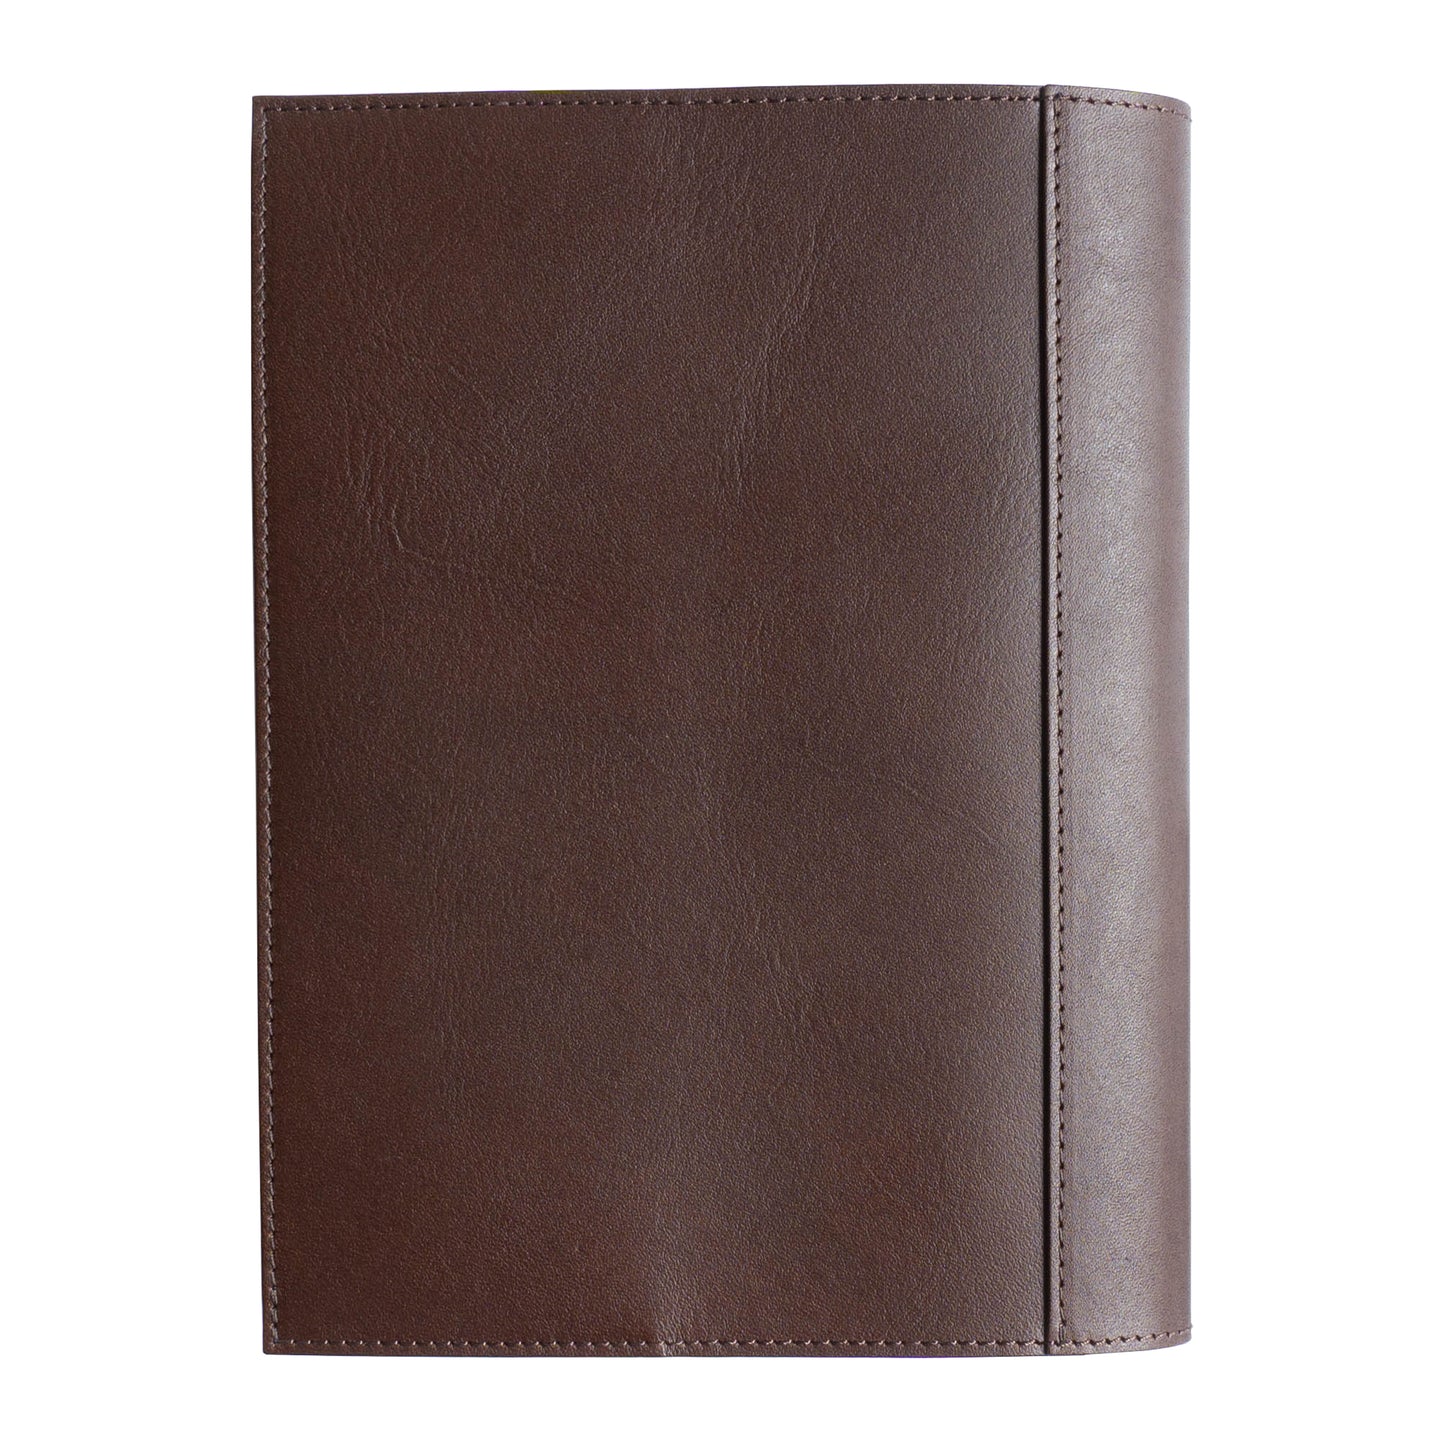 [Japanese Craftsman Made / Classic] Book cover 46 size / 46 size hard cover Genuine leather bookmark included